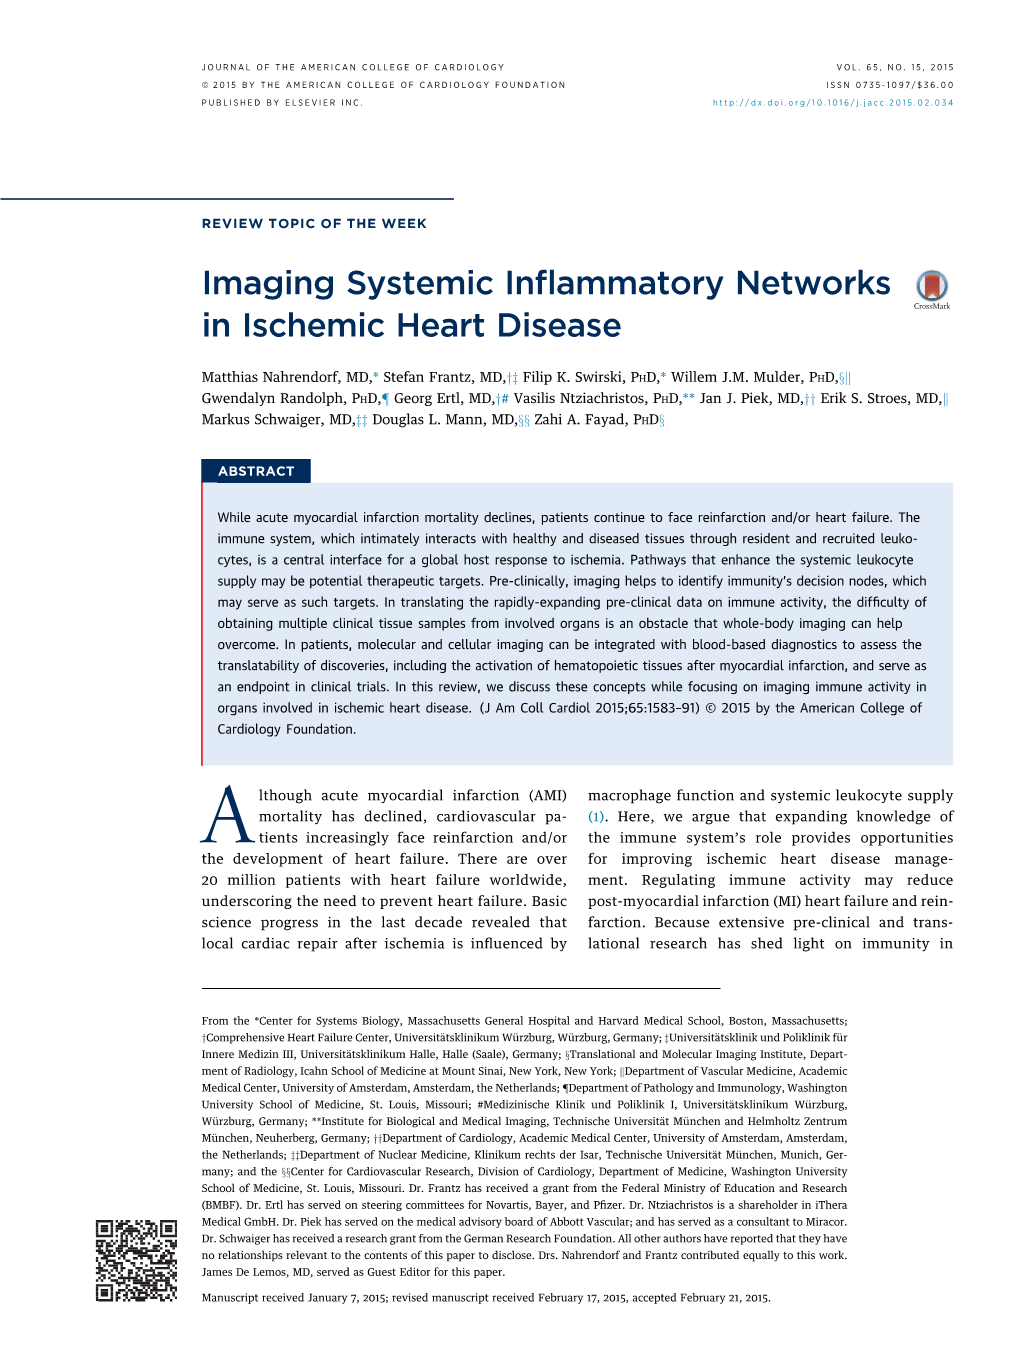 Imaging Systemic Inflammatory Networks in Ischemic Heart Disease